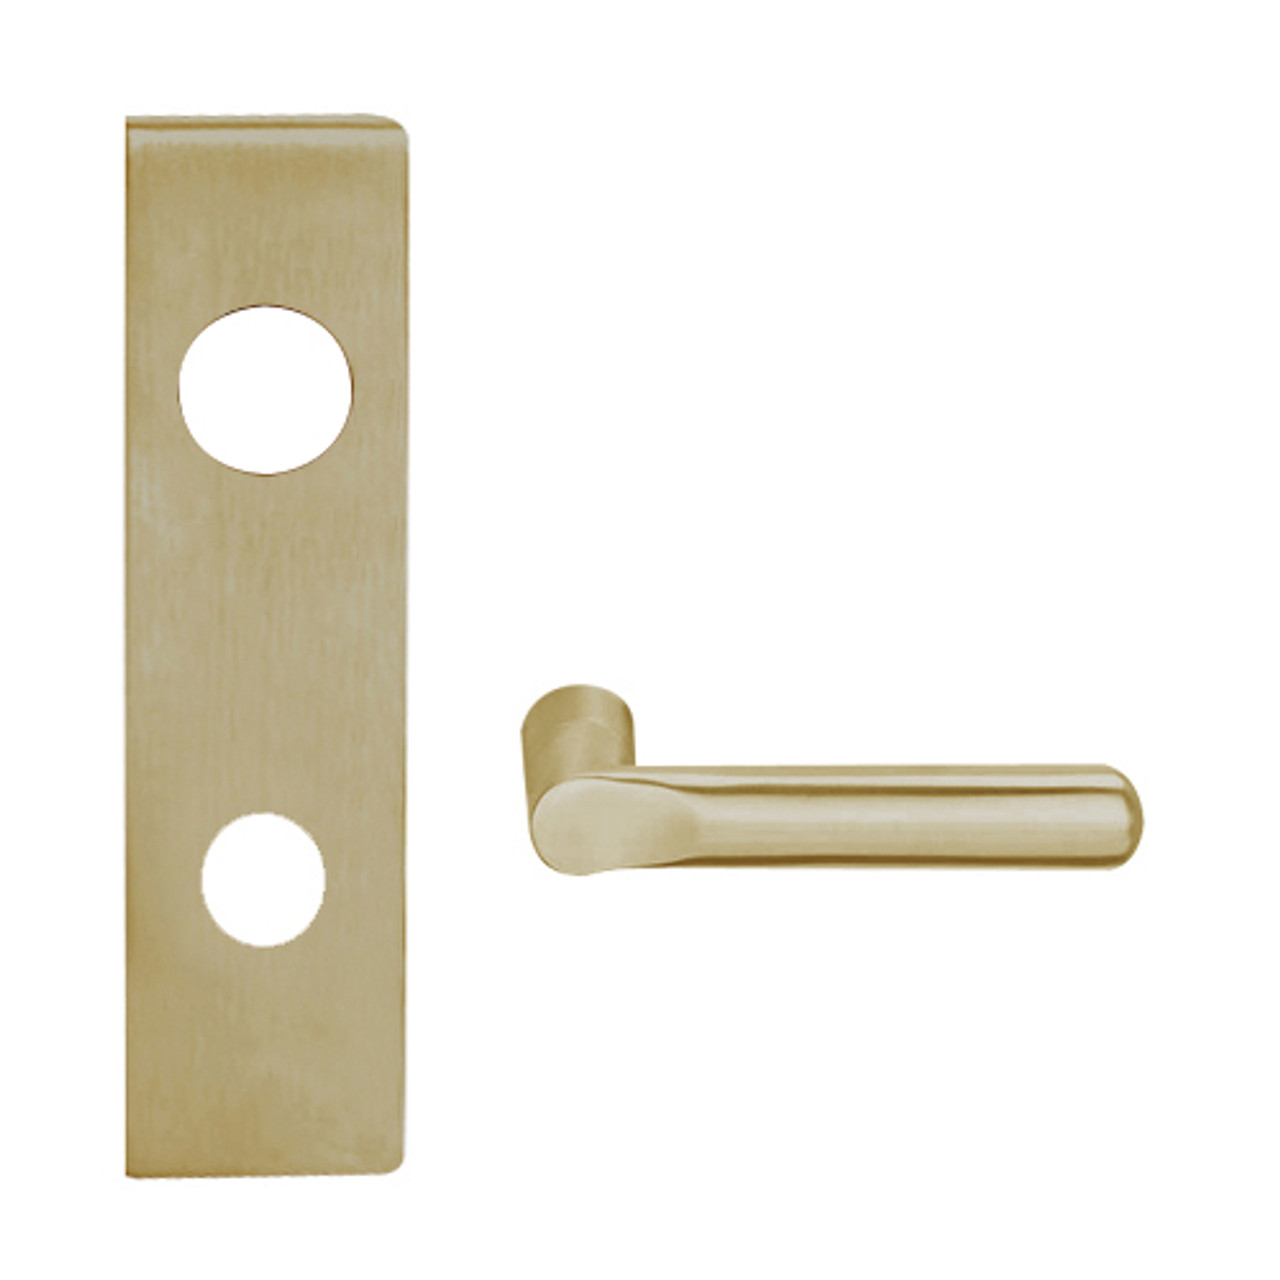 L9050R-18N-613 Schlage L Series Entrance Commercial Mortise Lock with 18 Cast Lever Design and Full Size Core in Oil Rubbed Bronze